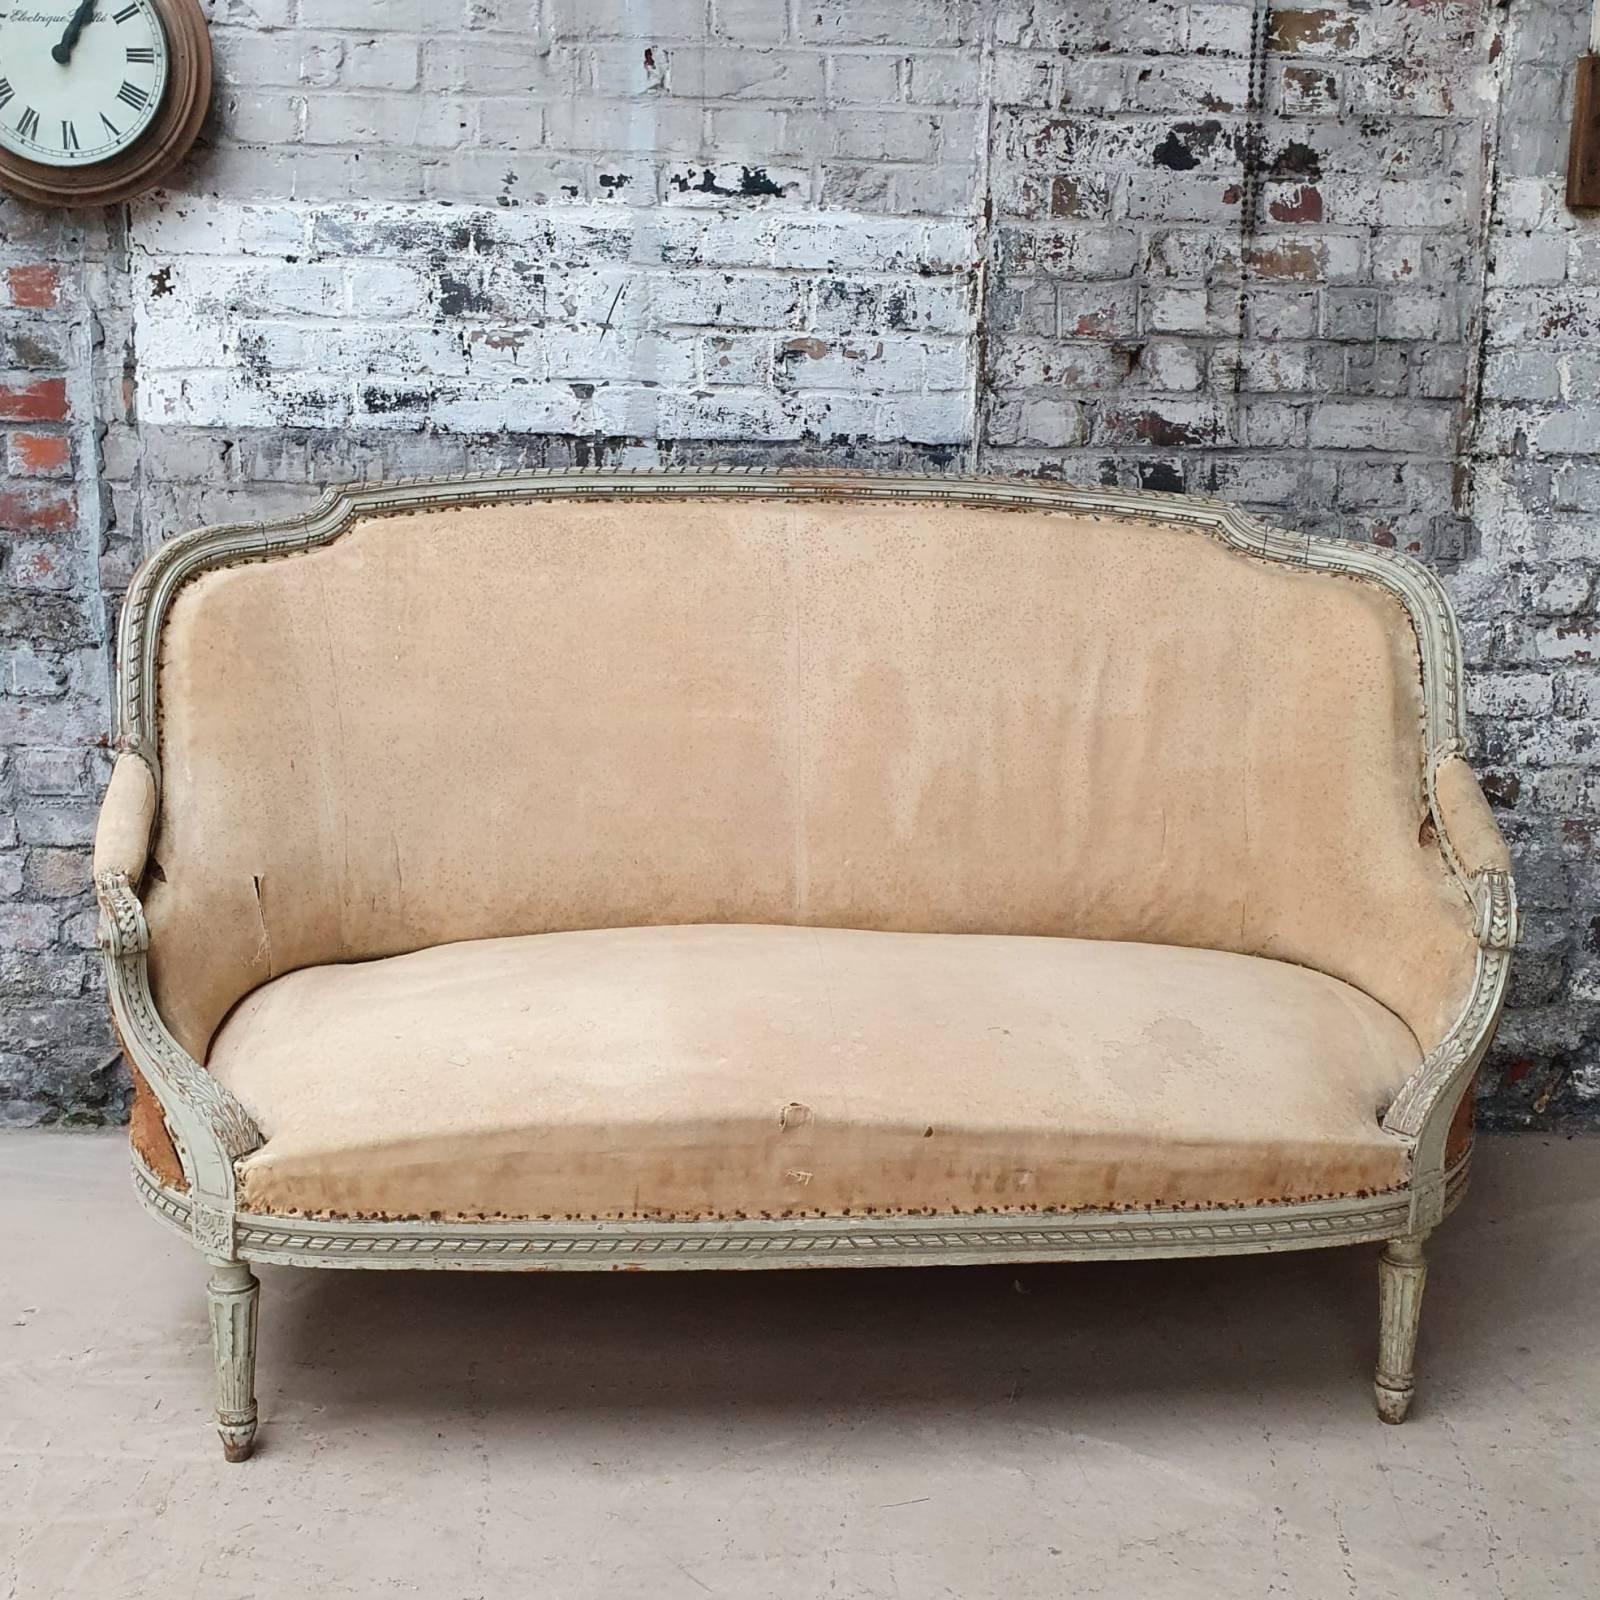 An exquisite French 19th century Louis XVI style sofa. Make a statement in your living space with this elegant sofa. Featuring the original patinated green/grey paint on a hand carved frame, this settee has been stripped down to the muslin and is